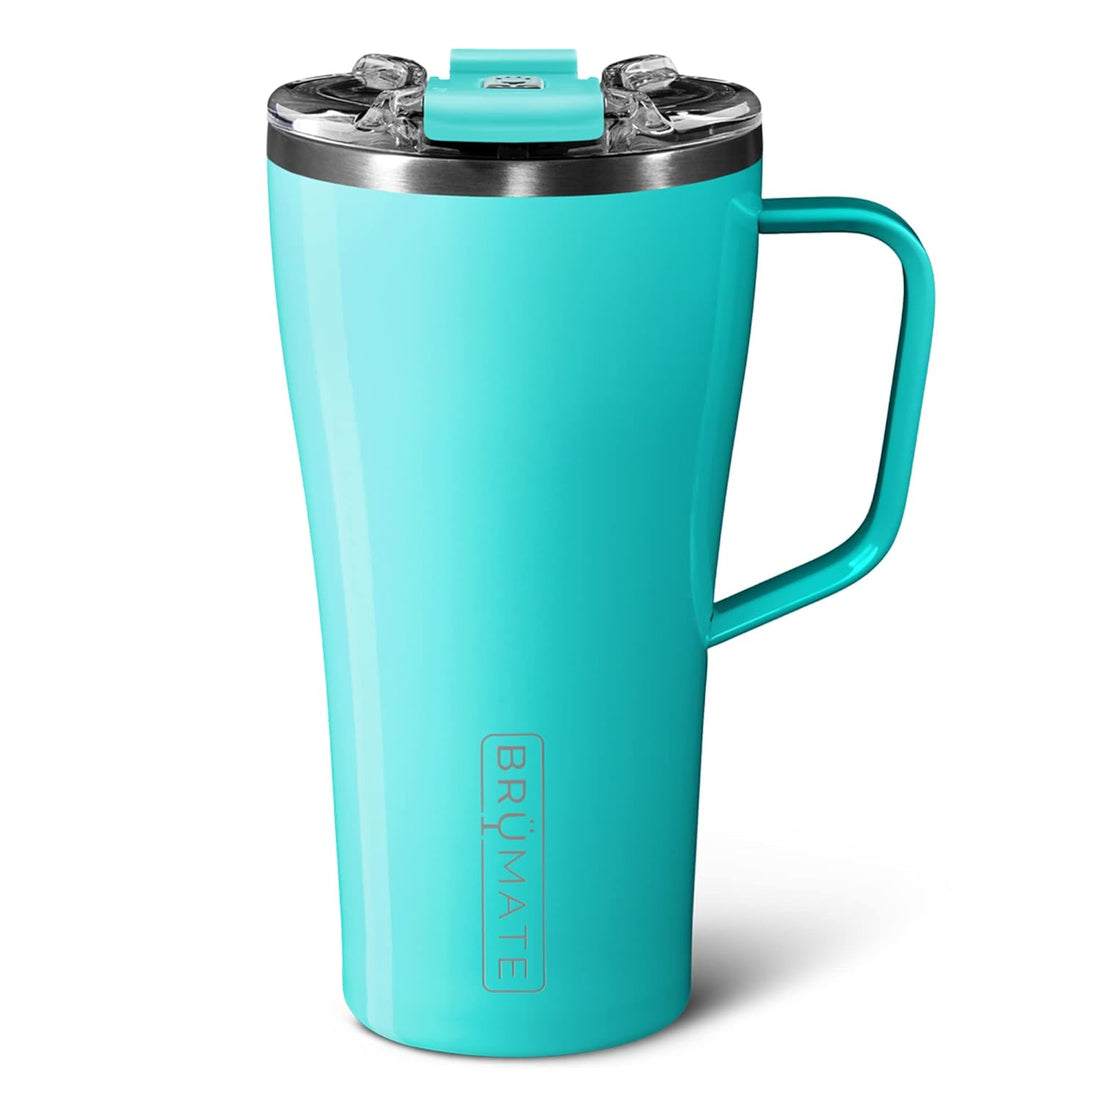 BrüMate Toddy 22oz 100% Leak Proof Insulated Coffee Mug with Handle & Lid - Stainless Steel Coffee Travel Mug - Double Walled Coffee Cup (Aqua)